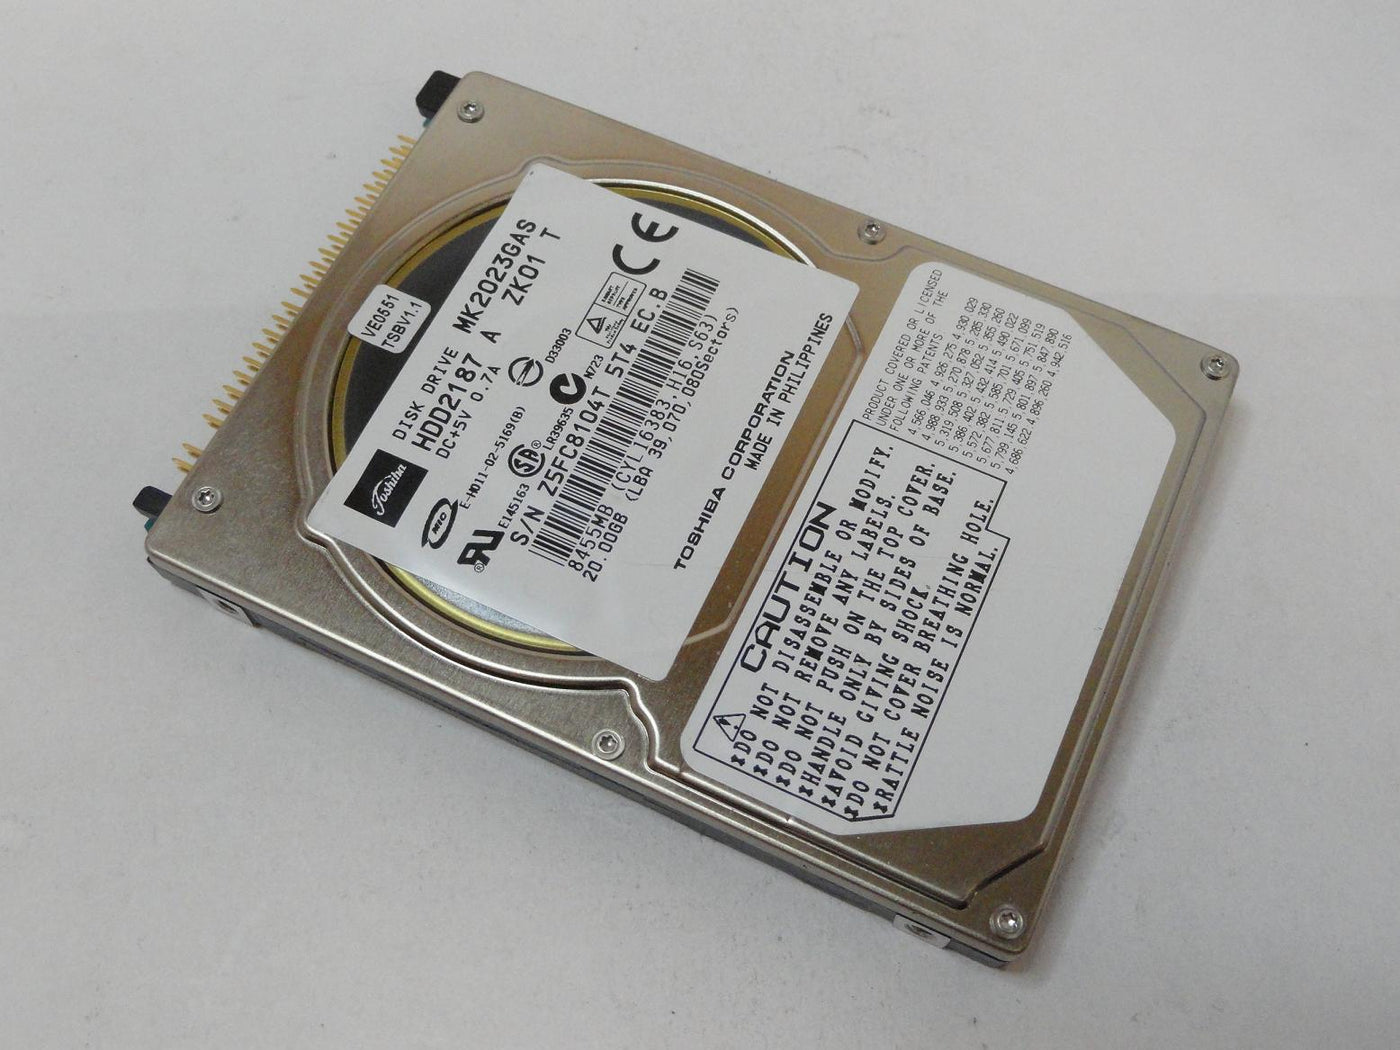 HDD2187 - Toshiba HP 20GB IDE 5400rpm 3.5in Laptop HDD - Refurbished